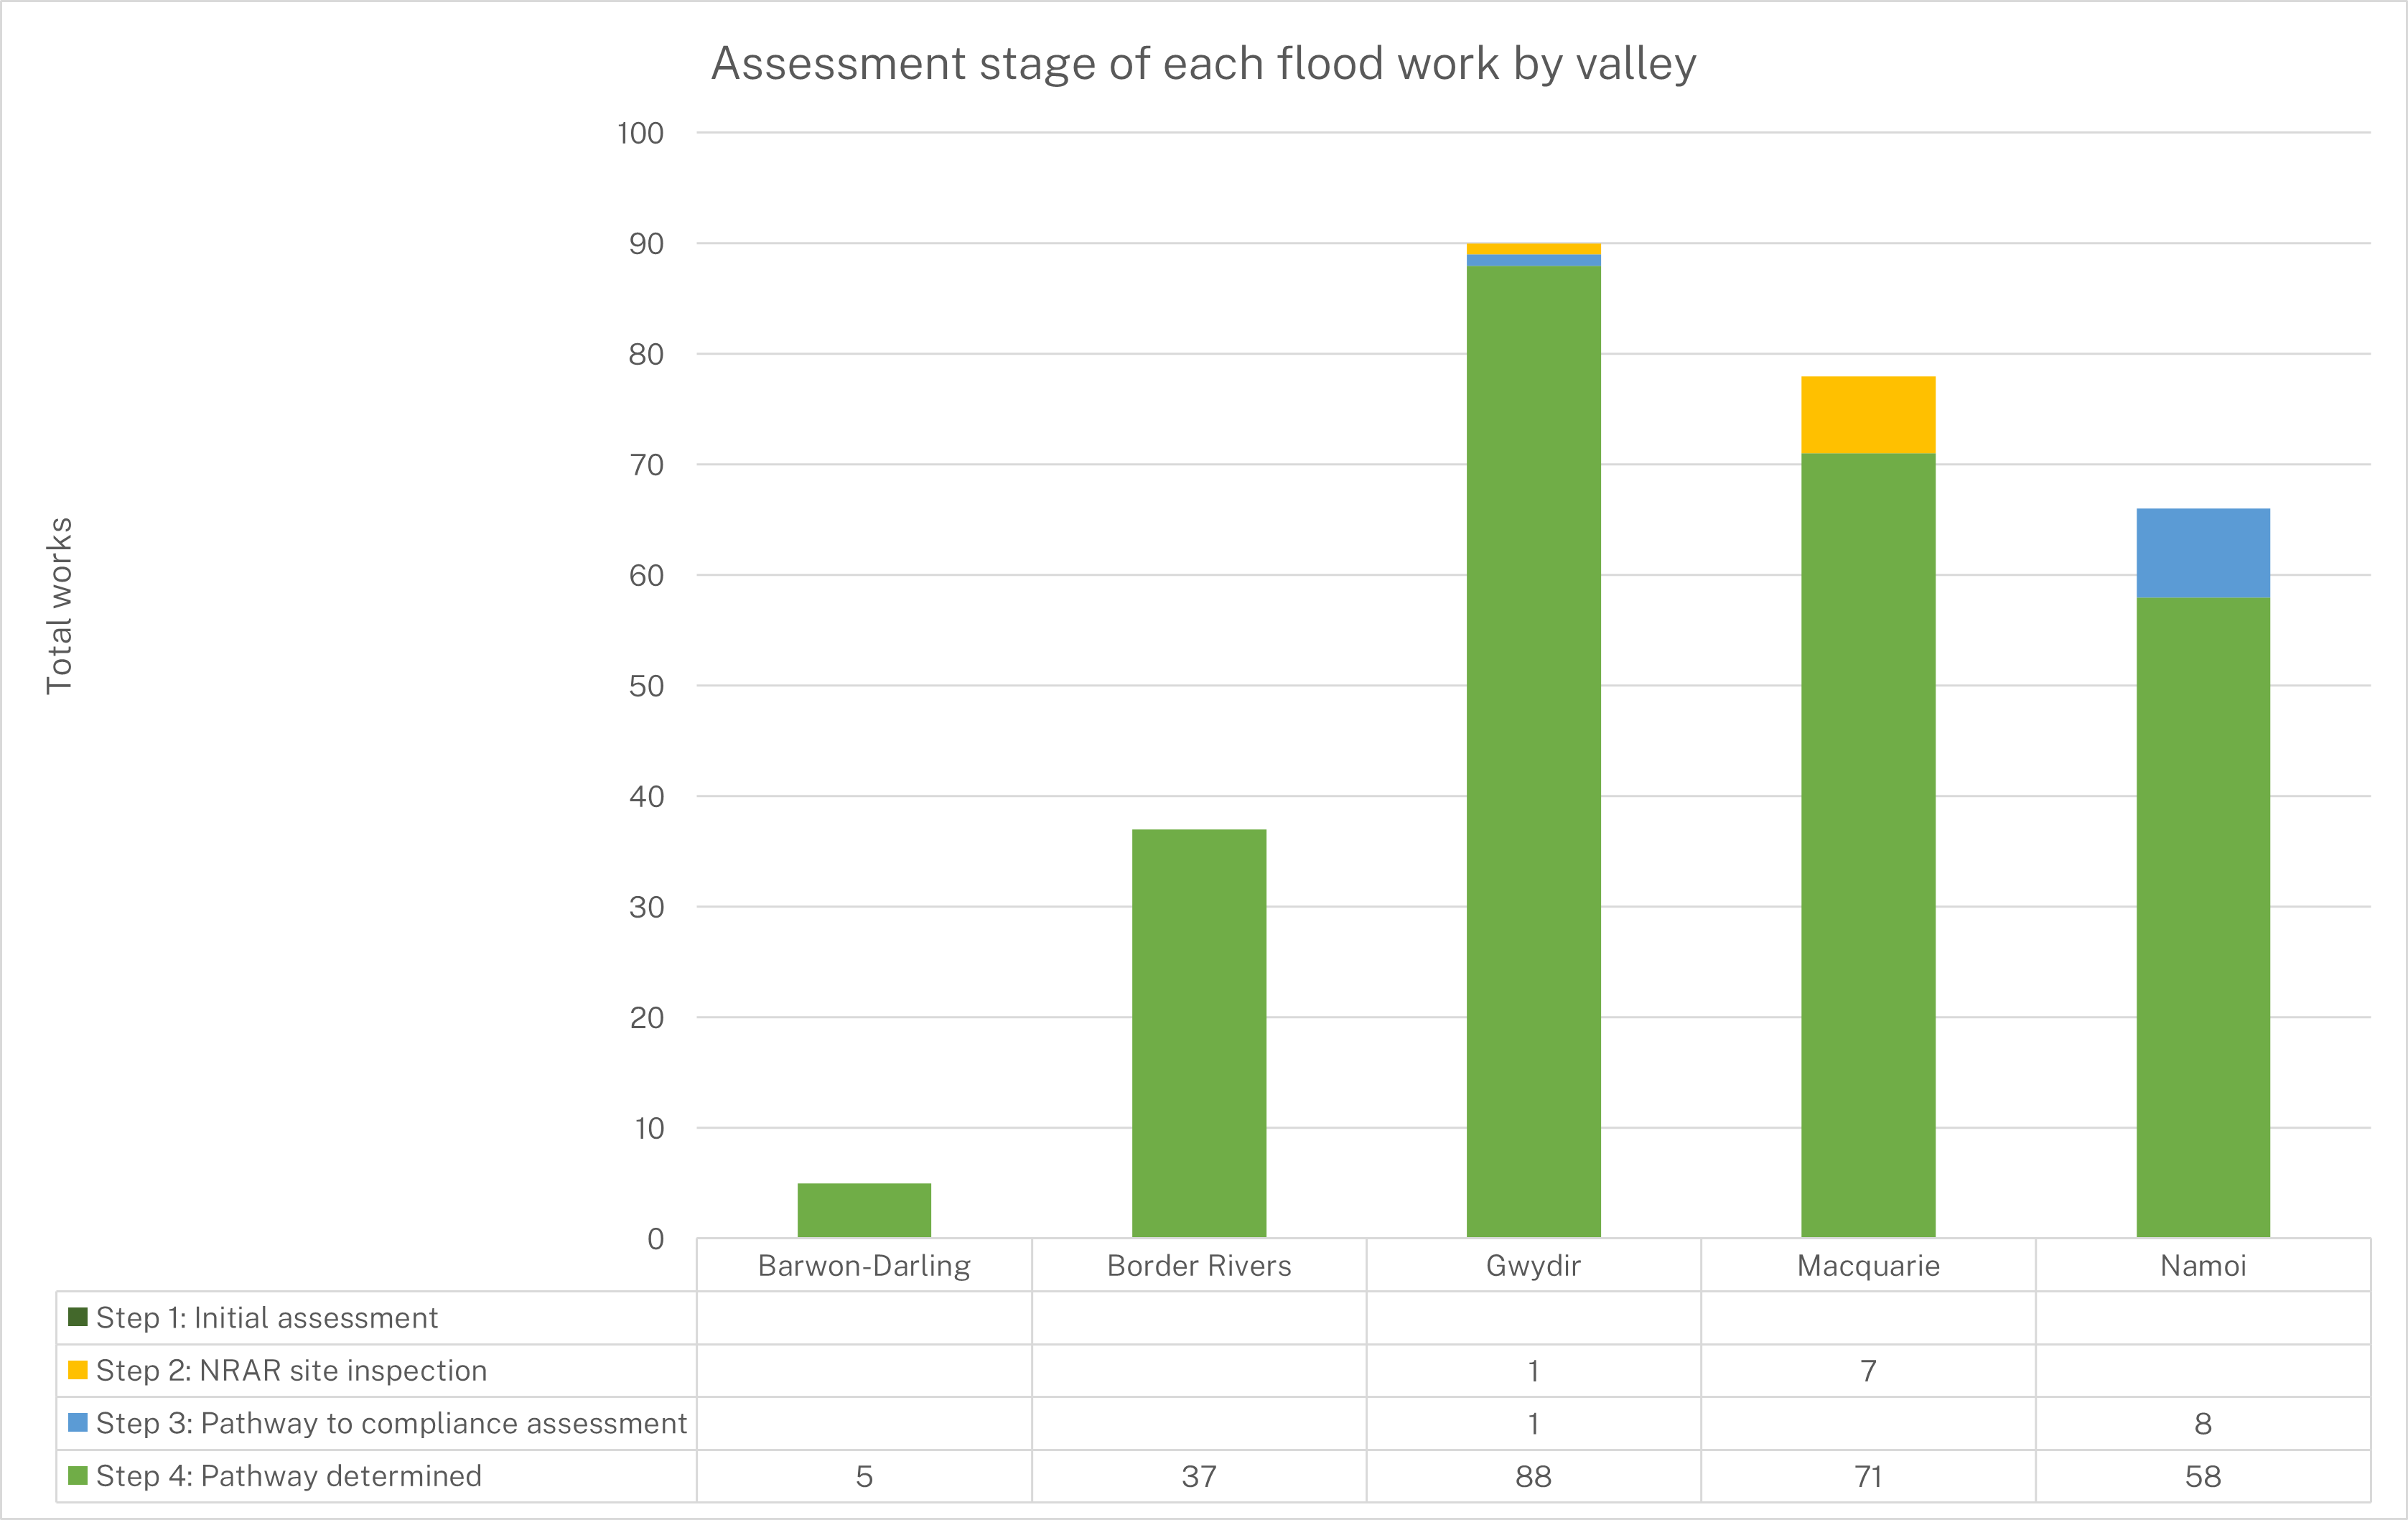 The table outlines the assessment stage for all flood works by valley.